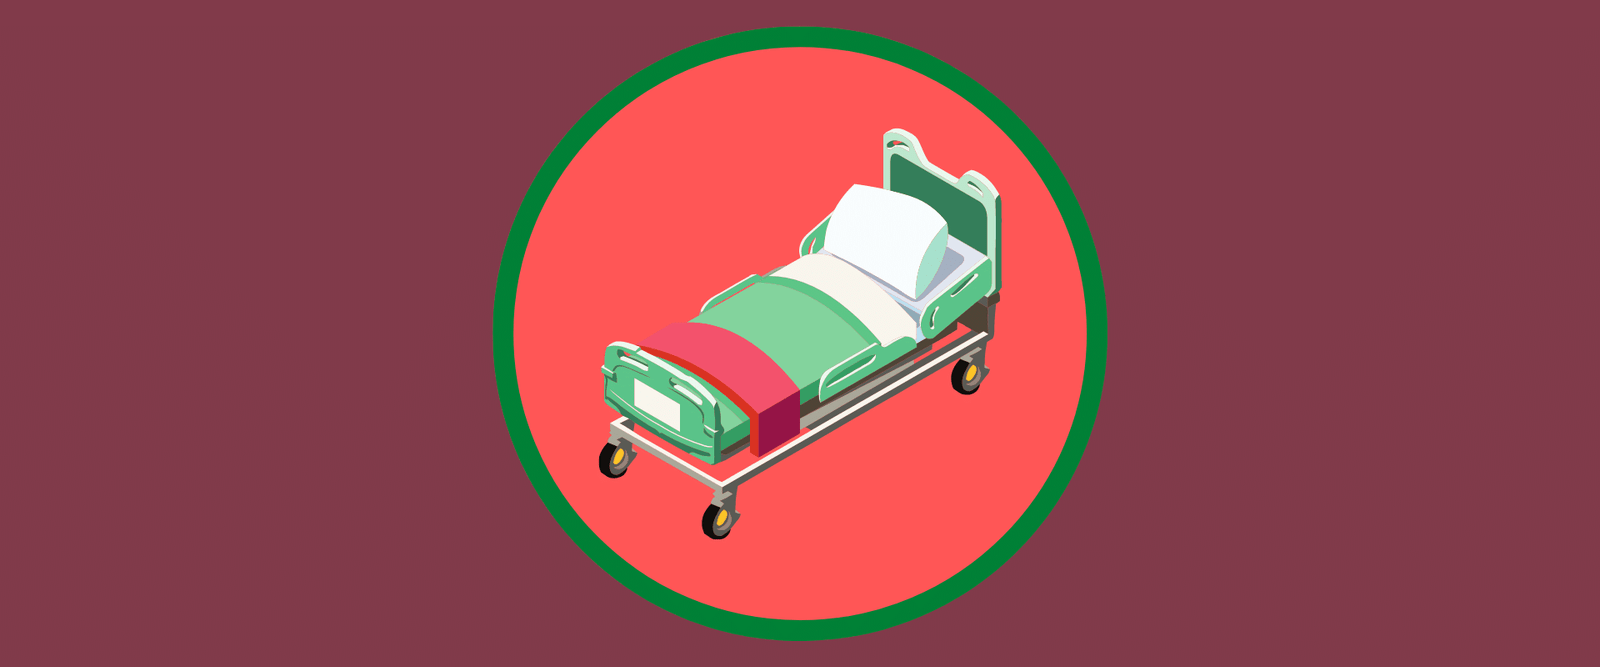 An adjustable profile bed may help you get a better night's sleep by conforming to your body's unique shape and size. Because of their adaptability, these beds are often used by those with limited mobility or medical needs. This article will discuss some scenarios in which a profiling bed might be useful. Mobility Issues: A profiling bed might be helpful if you have mobility issues and problems getting in and out of bed. Profiling beds may be adjusted to many positions, including a seated one, to make getting in and out of bed easier. Extras like side rails and handrails provide stability and support while getting in and out of bed on a profiling bed. Health Conditions: A profiling bed may be necessary if you have a medical condition requiring a certain sleeping position. If you have acid reflux, sleeping upright may help you feel more comfortable and get a good night's rest. Alternatively, if you suffer from lower back discomfort, you can get relief by simply lifting your legs. You may get a better night's sleep with the help of a profiling bed, which allows you to alter the bed's position to meet your health demands. Convenience: People who have trouble getting in and out of bed owing to age or physical restrictions may also find profiling beds a helpful alternative. Profiling beds enable you to get in and out of bed without having to move about or exert yourself by adjusting the bed's position using a remote control or touchpad. Many modern profiling beds now include built-in USB plugs to keep your electronic gadgets charged and near reach as you sleep. Improved Sleep Quality: A profiling bed might help you get a better night's rest, which is another good argument for investing in one. A profiling bed may help you sleep better and feel more refreshed in the morning by enabling you to adjust the firmness of the mattress and the lighting in your room to suit your individual preferences. You may get a profiling bed with a cooling system if you want to sleep in a colder atmosphere. Alternatively, if you're going to decompress with a massage before bed, a profiling bed equipped with massagers is a great option. Summary Of Reasons You Might Need A Profiling Bed Reasons You Might Need A Profiling Bed